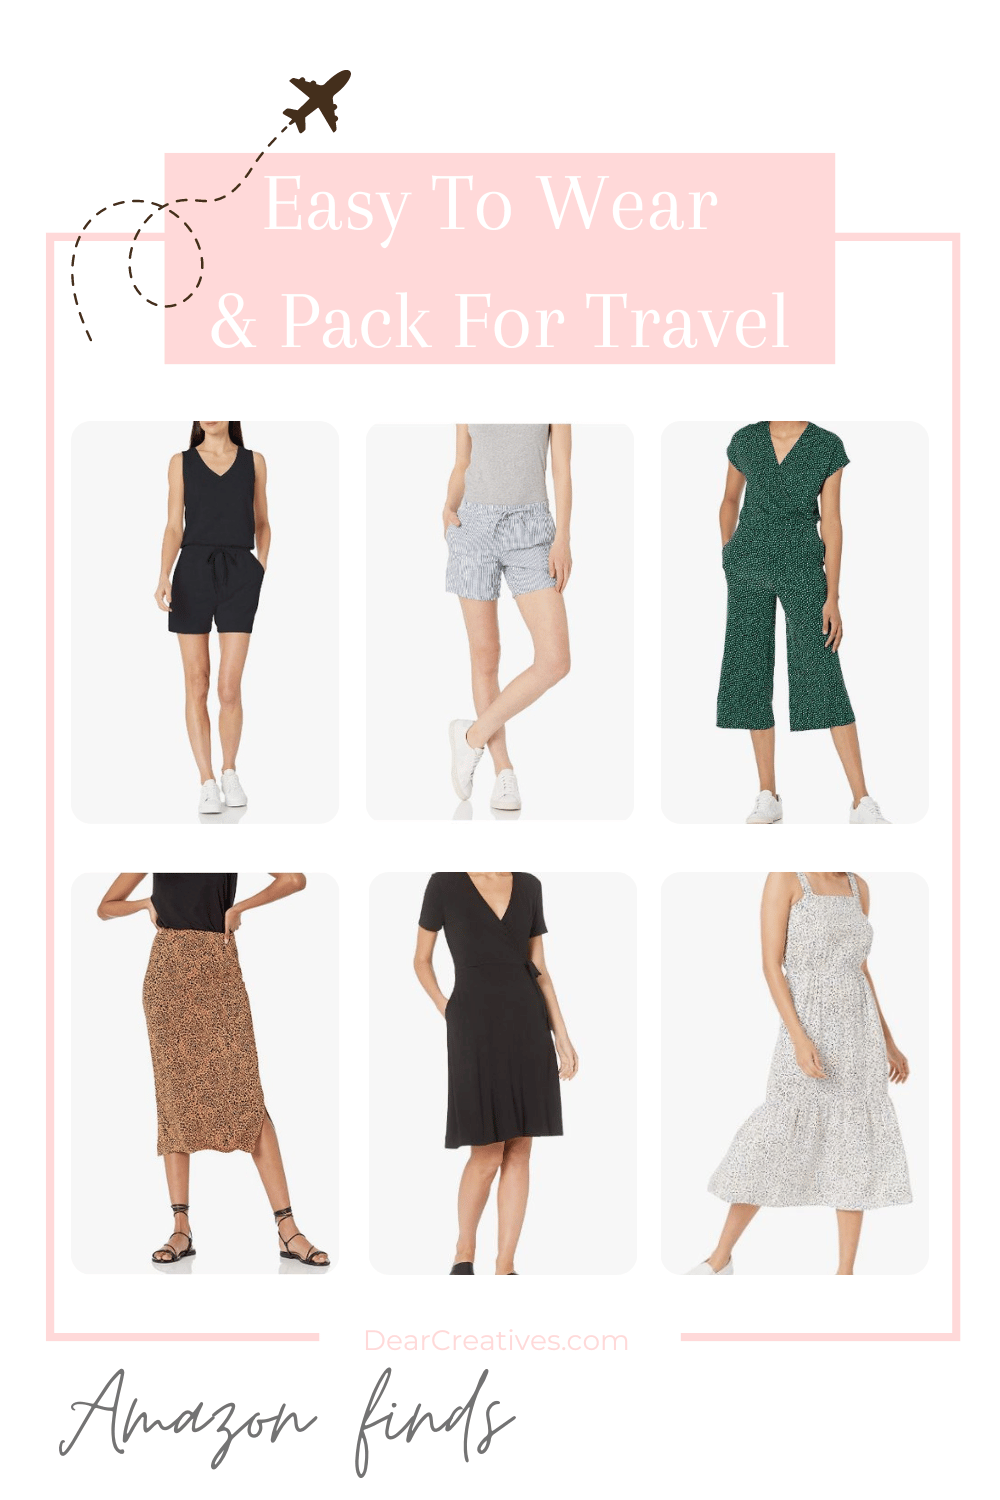 Easy To Wear Outfit Ideas For Packing and Travel - DearCreatives.com